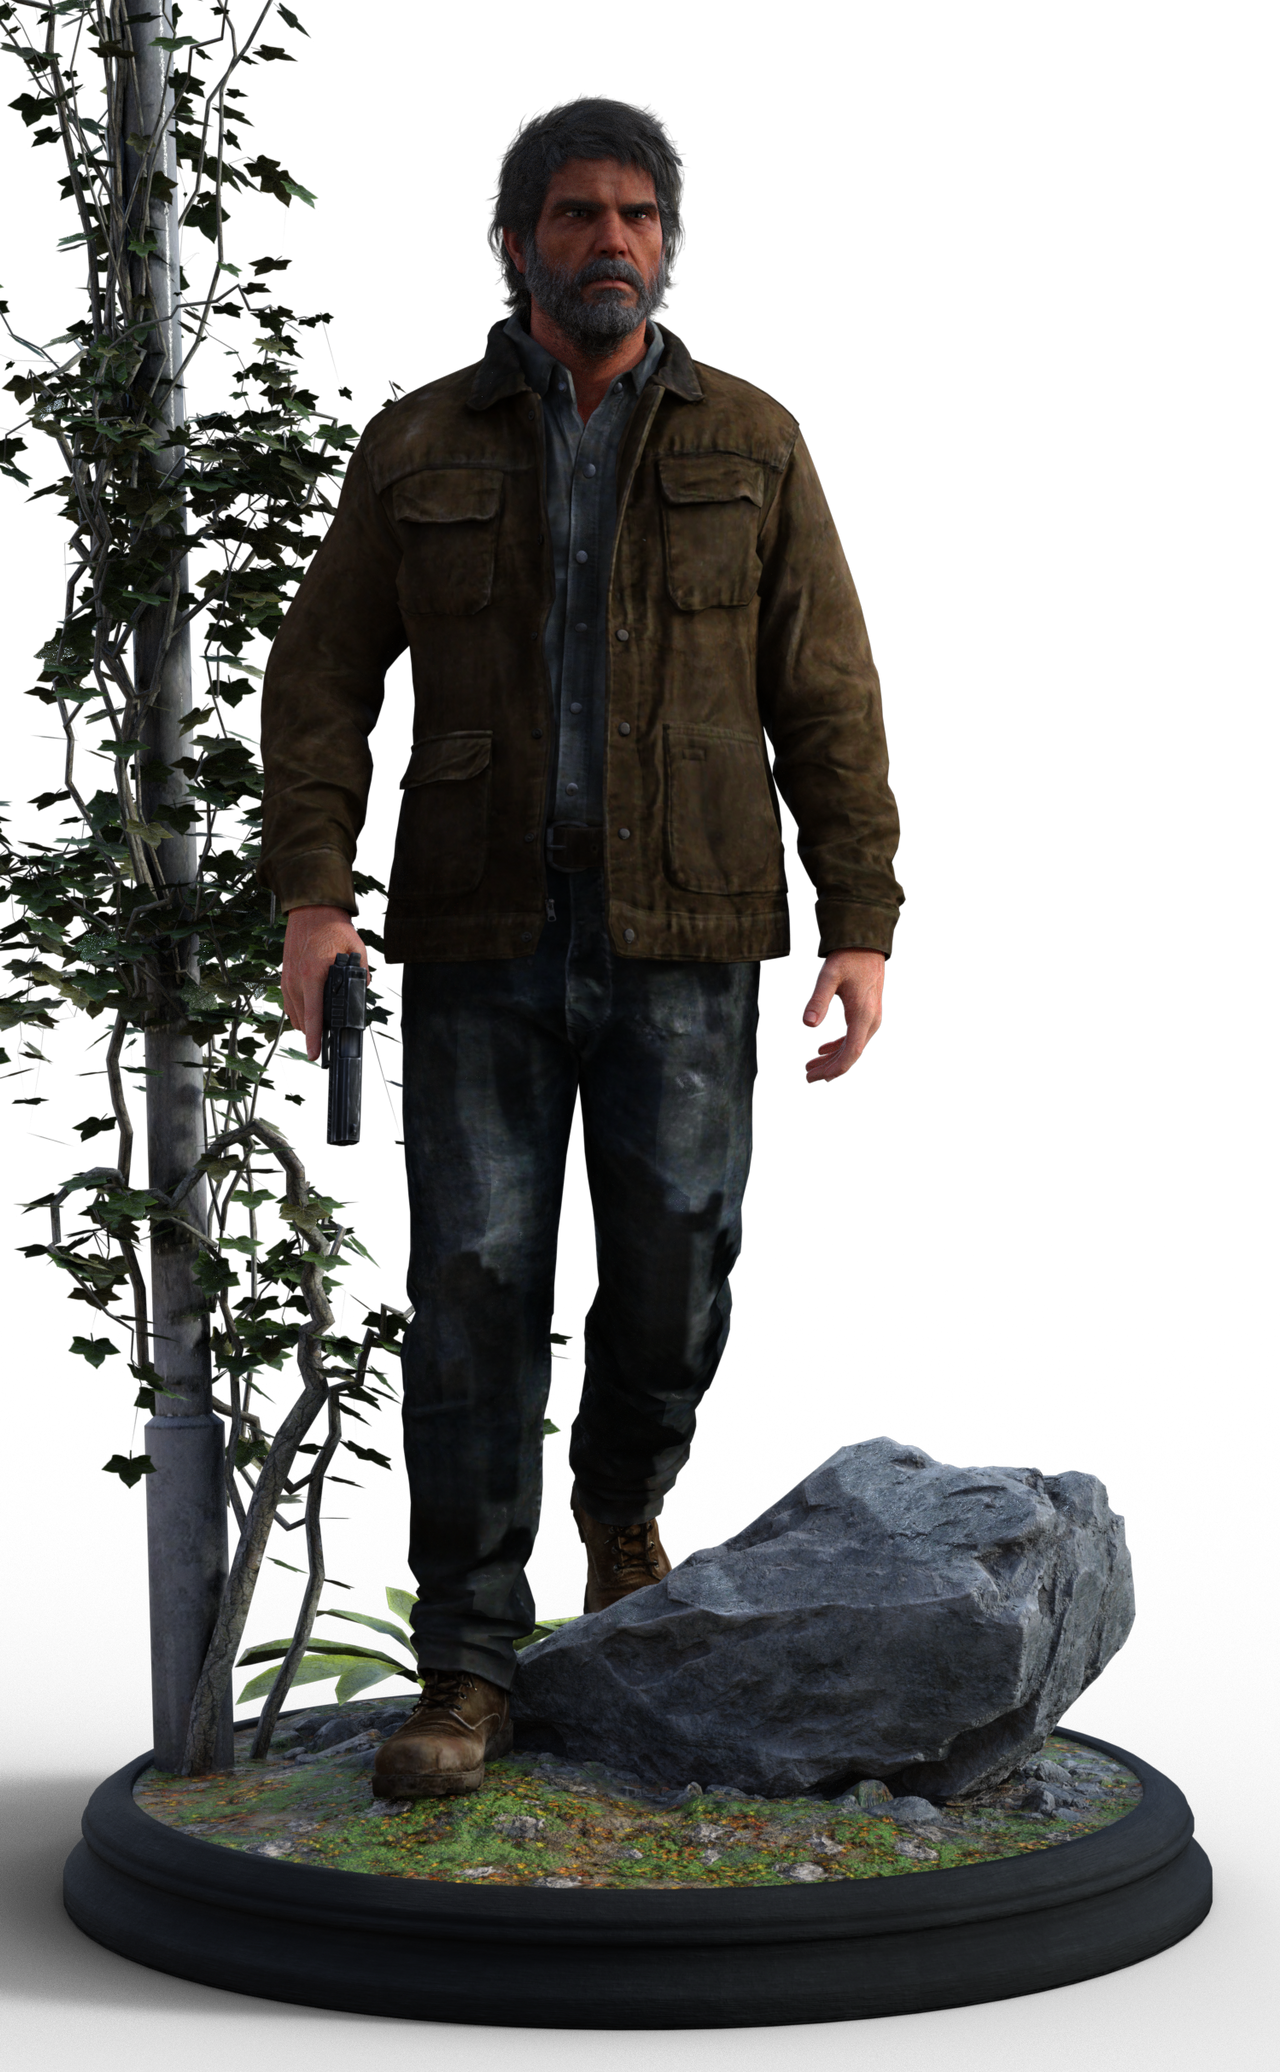 Make Your Own Joel from The Last of Us 2 Costume